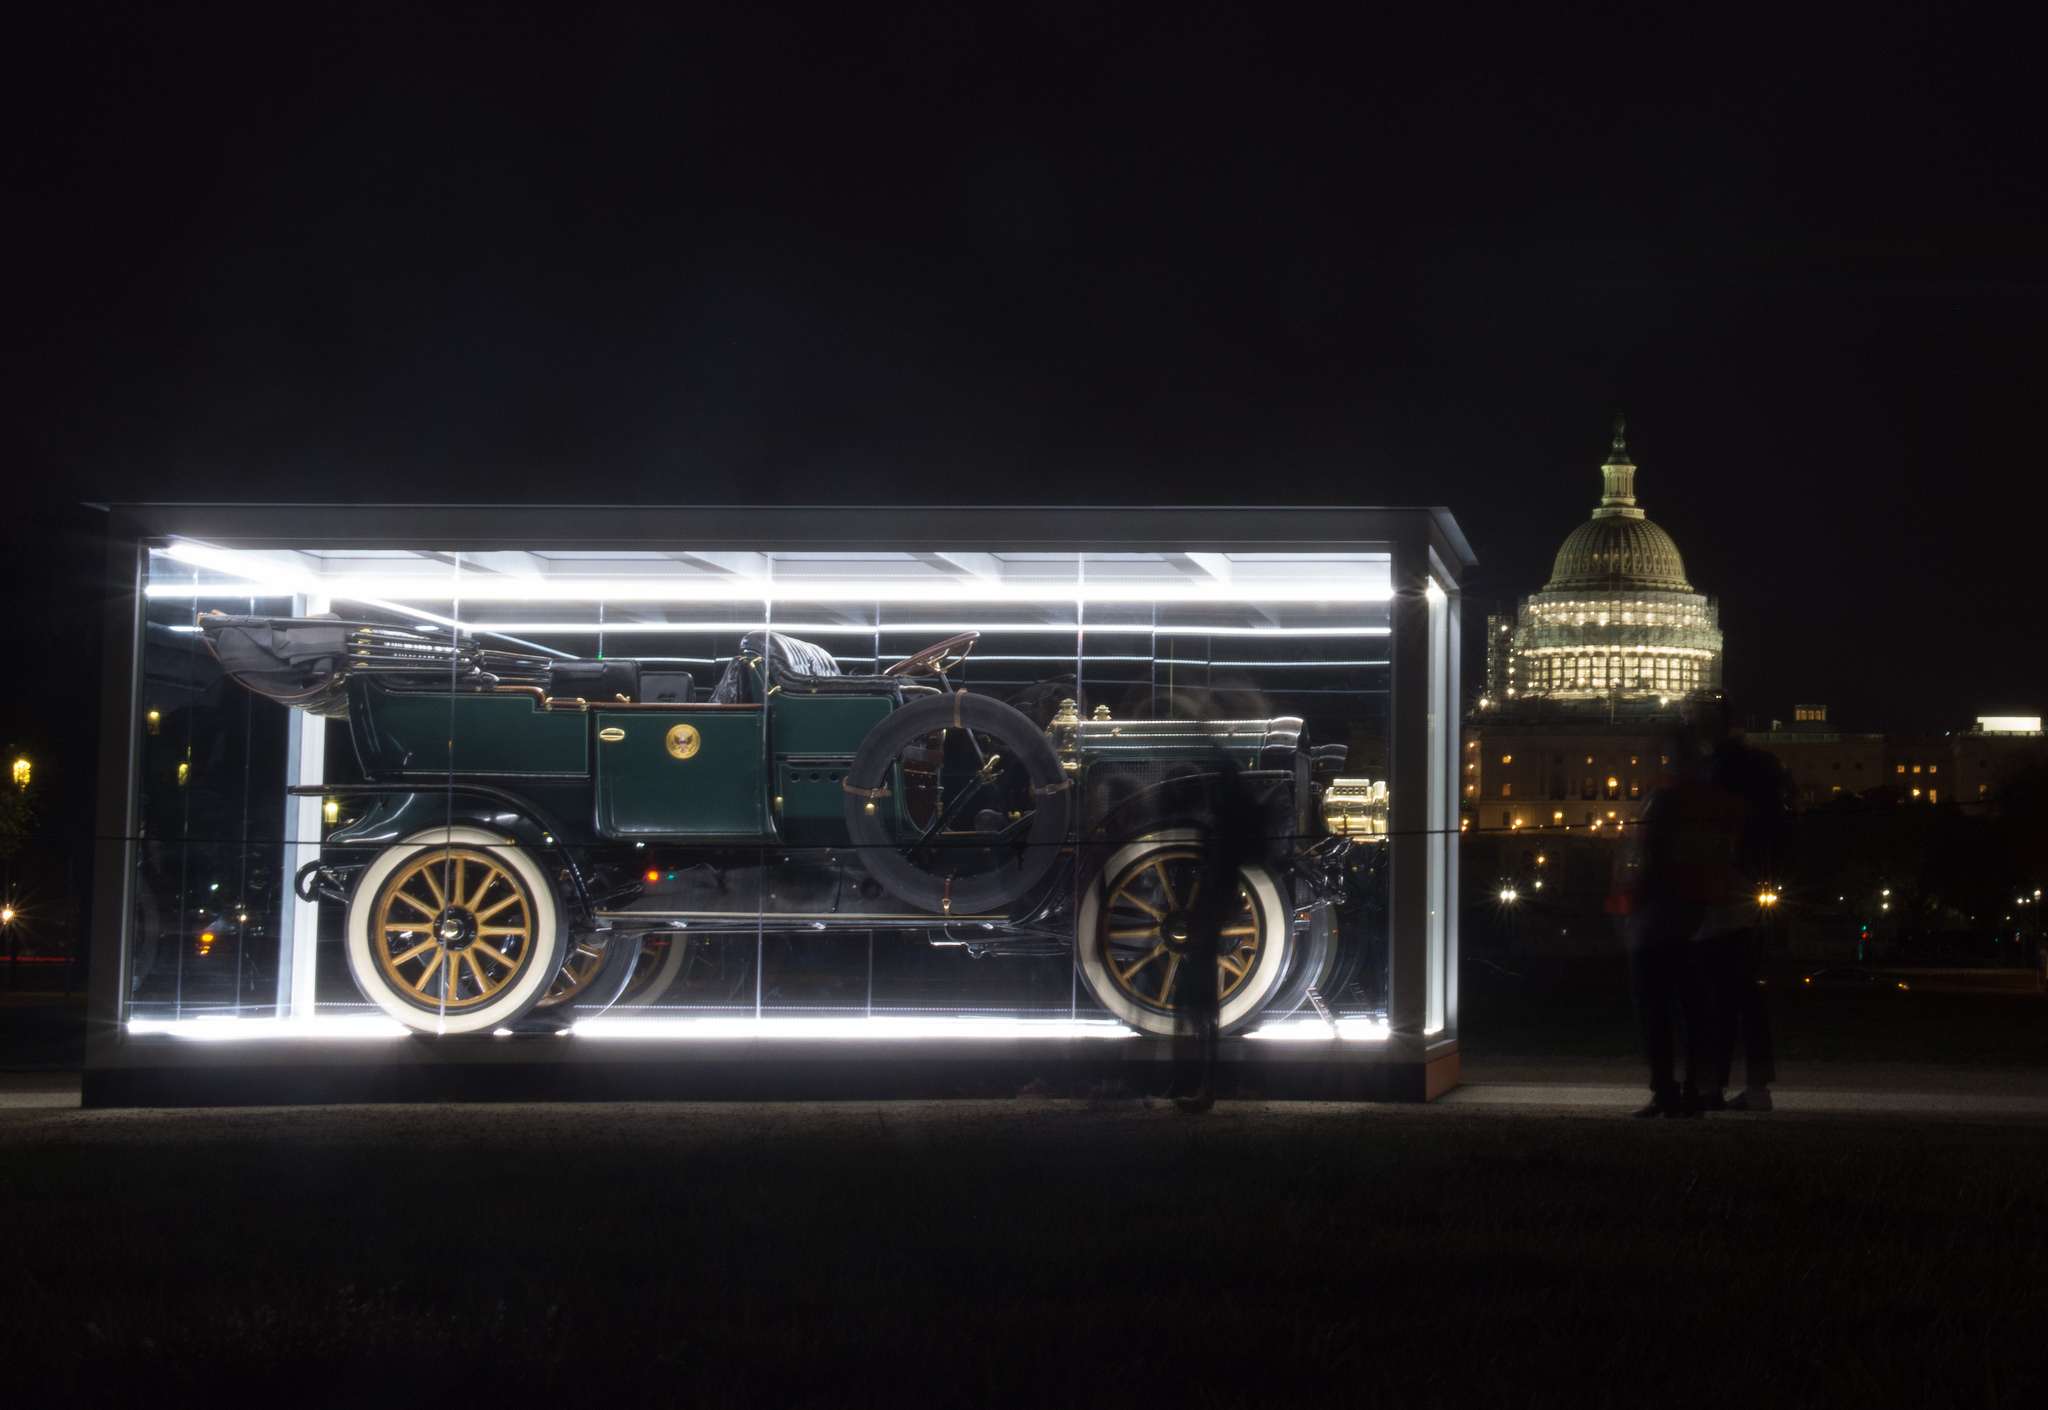 taft steam car2 Exhibition of Presidential Taft Steam Car at the National Mall